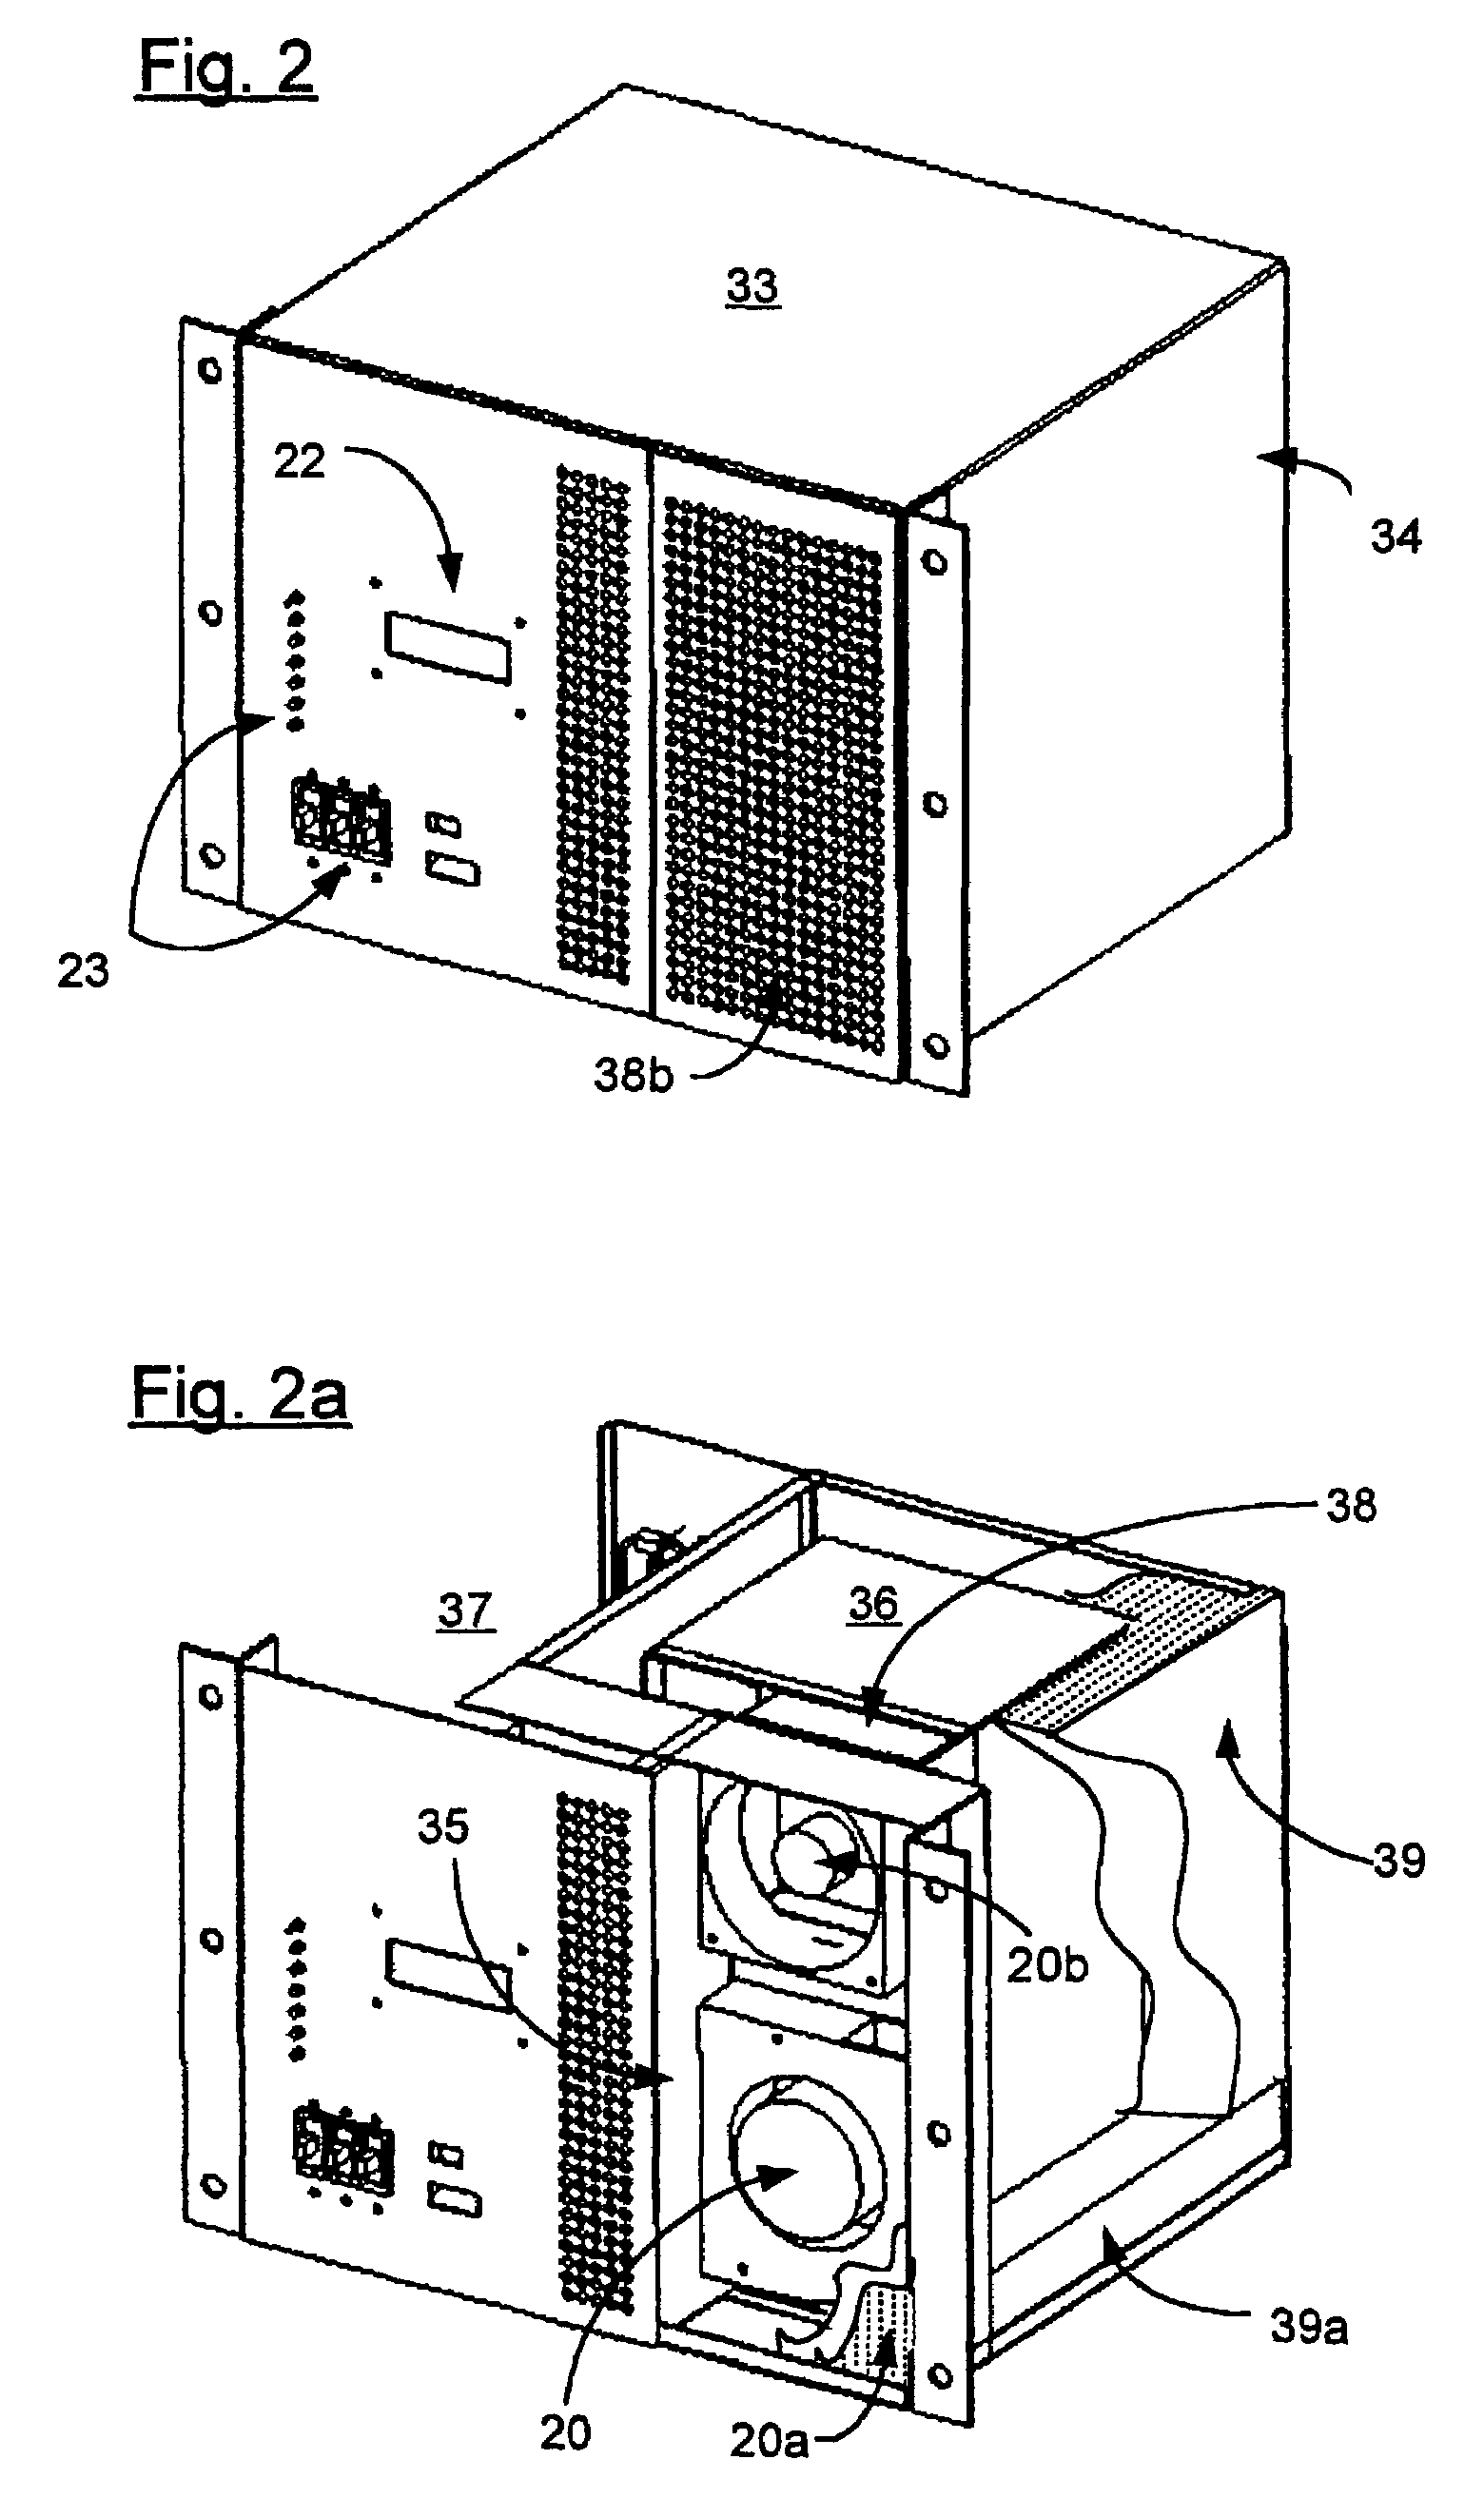 Reforming and hydrogen purification system